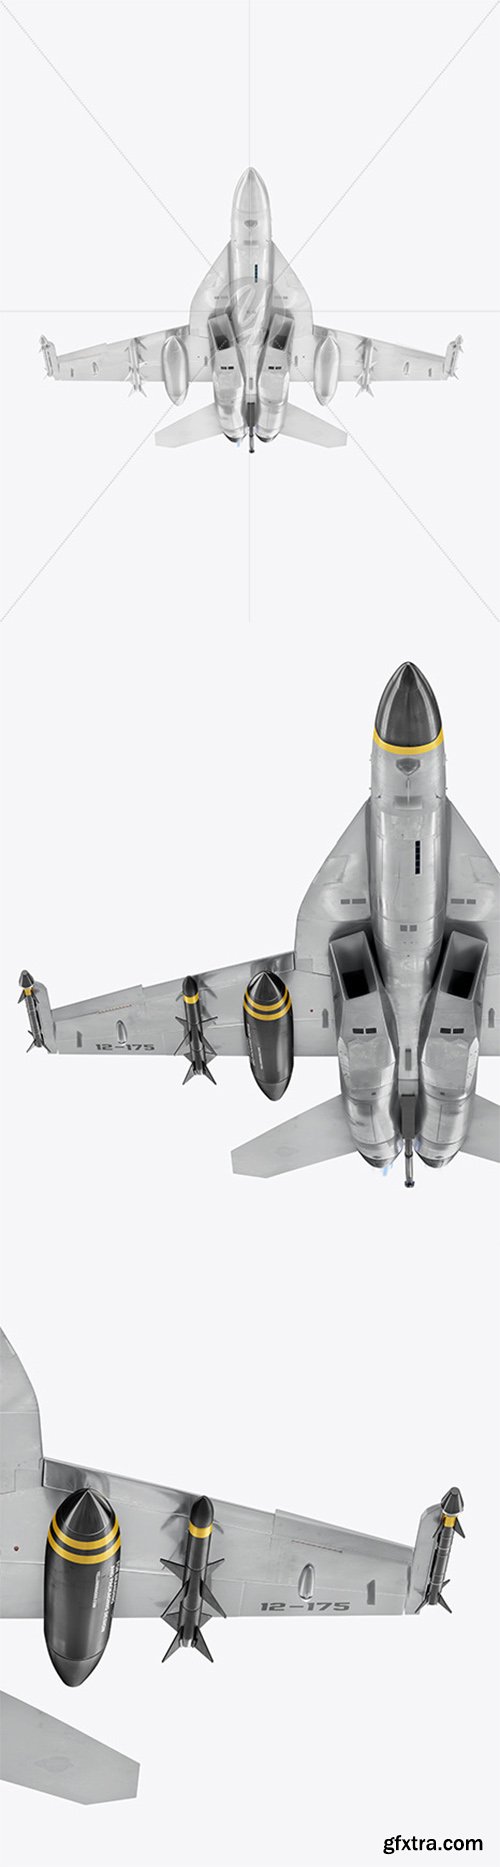 Combat Fighter - Front View 64954